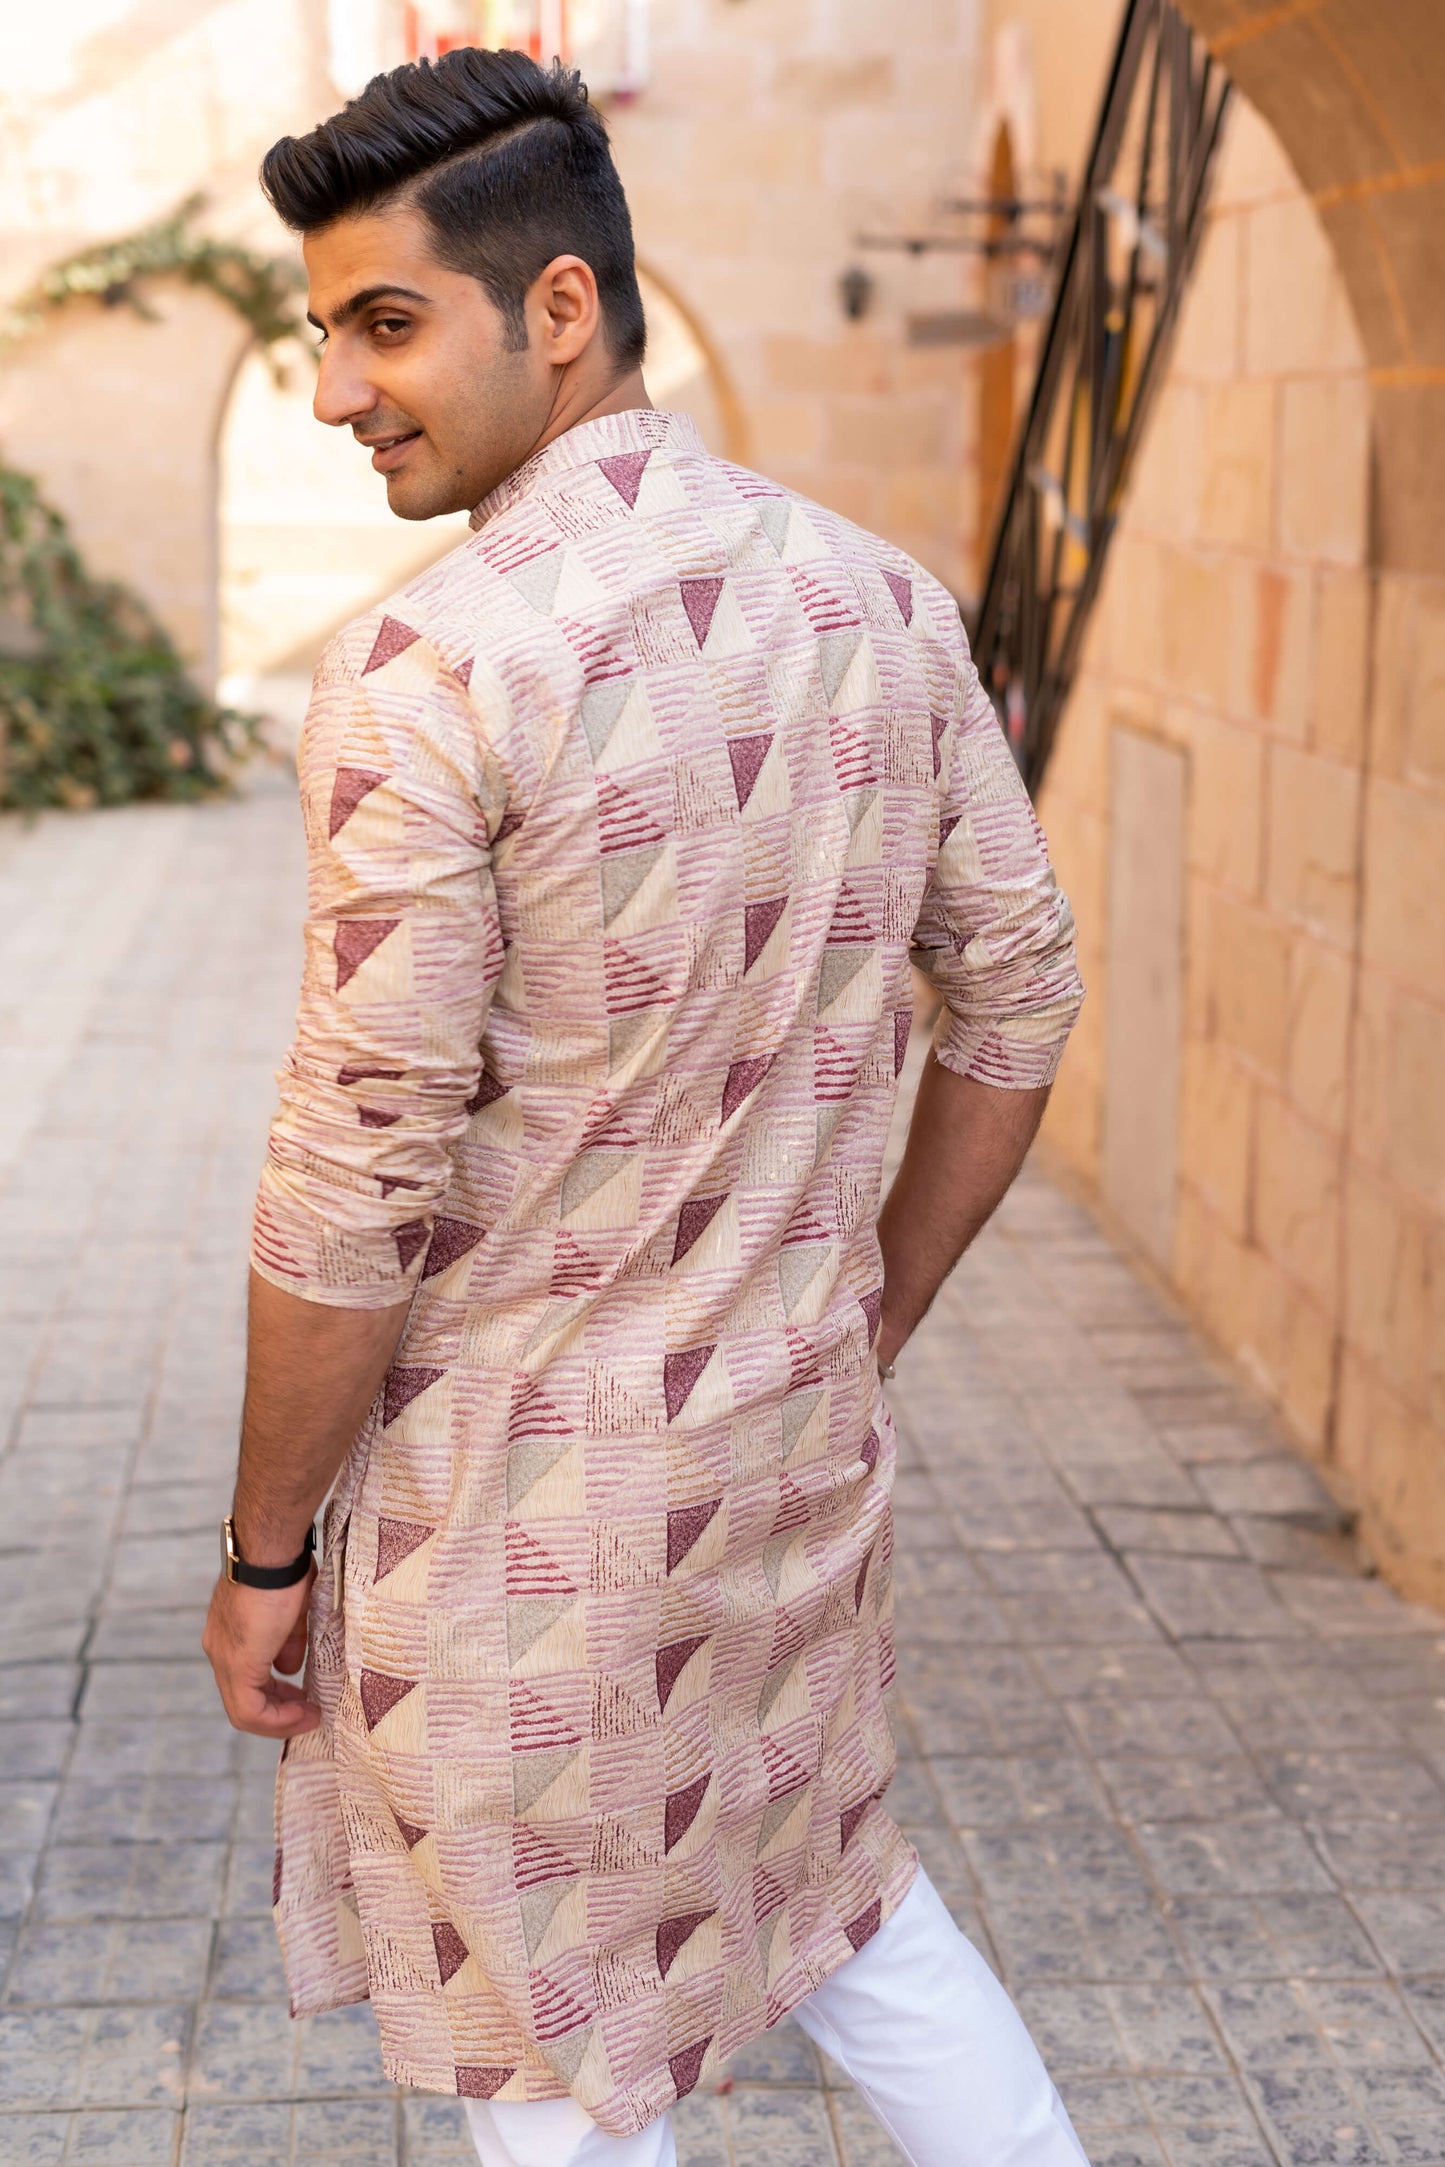 The Tribal Geometric Foil Print Long Kurta In Off-White And Pastel Pink Color